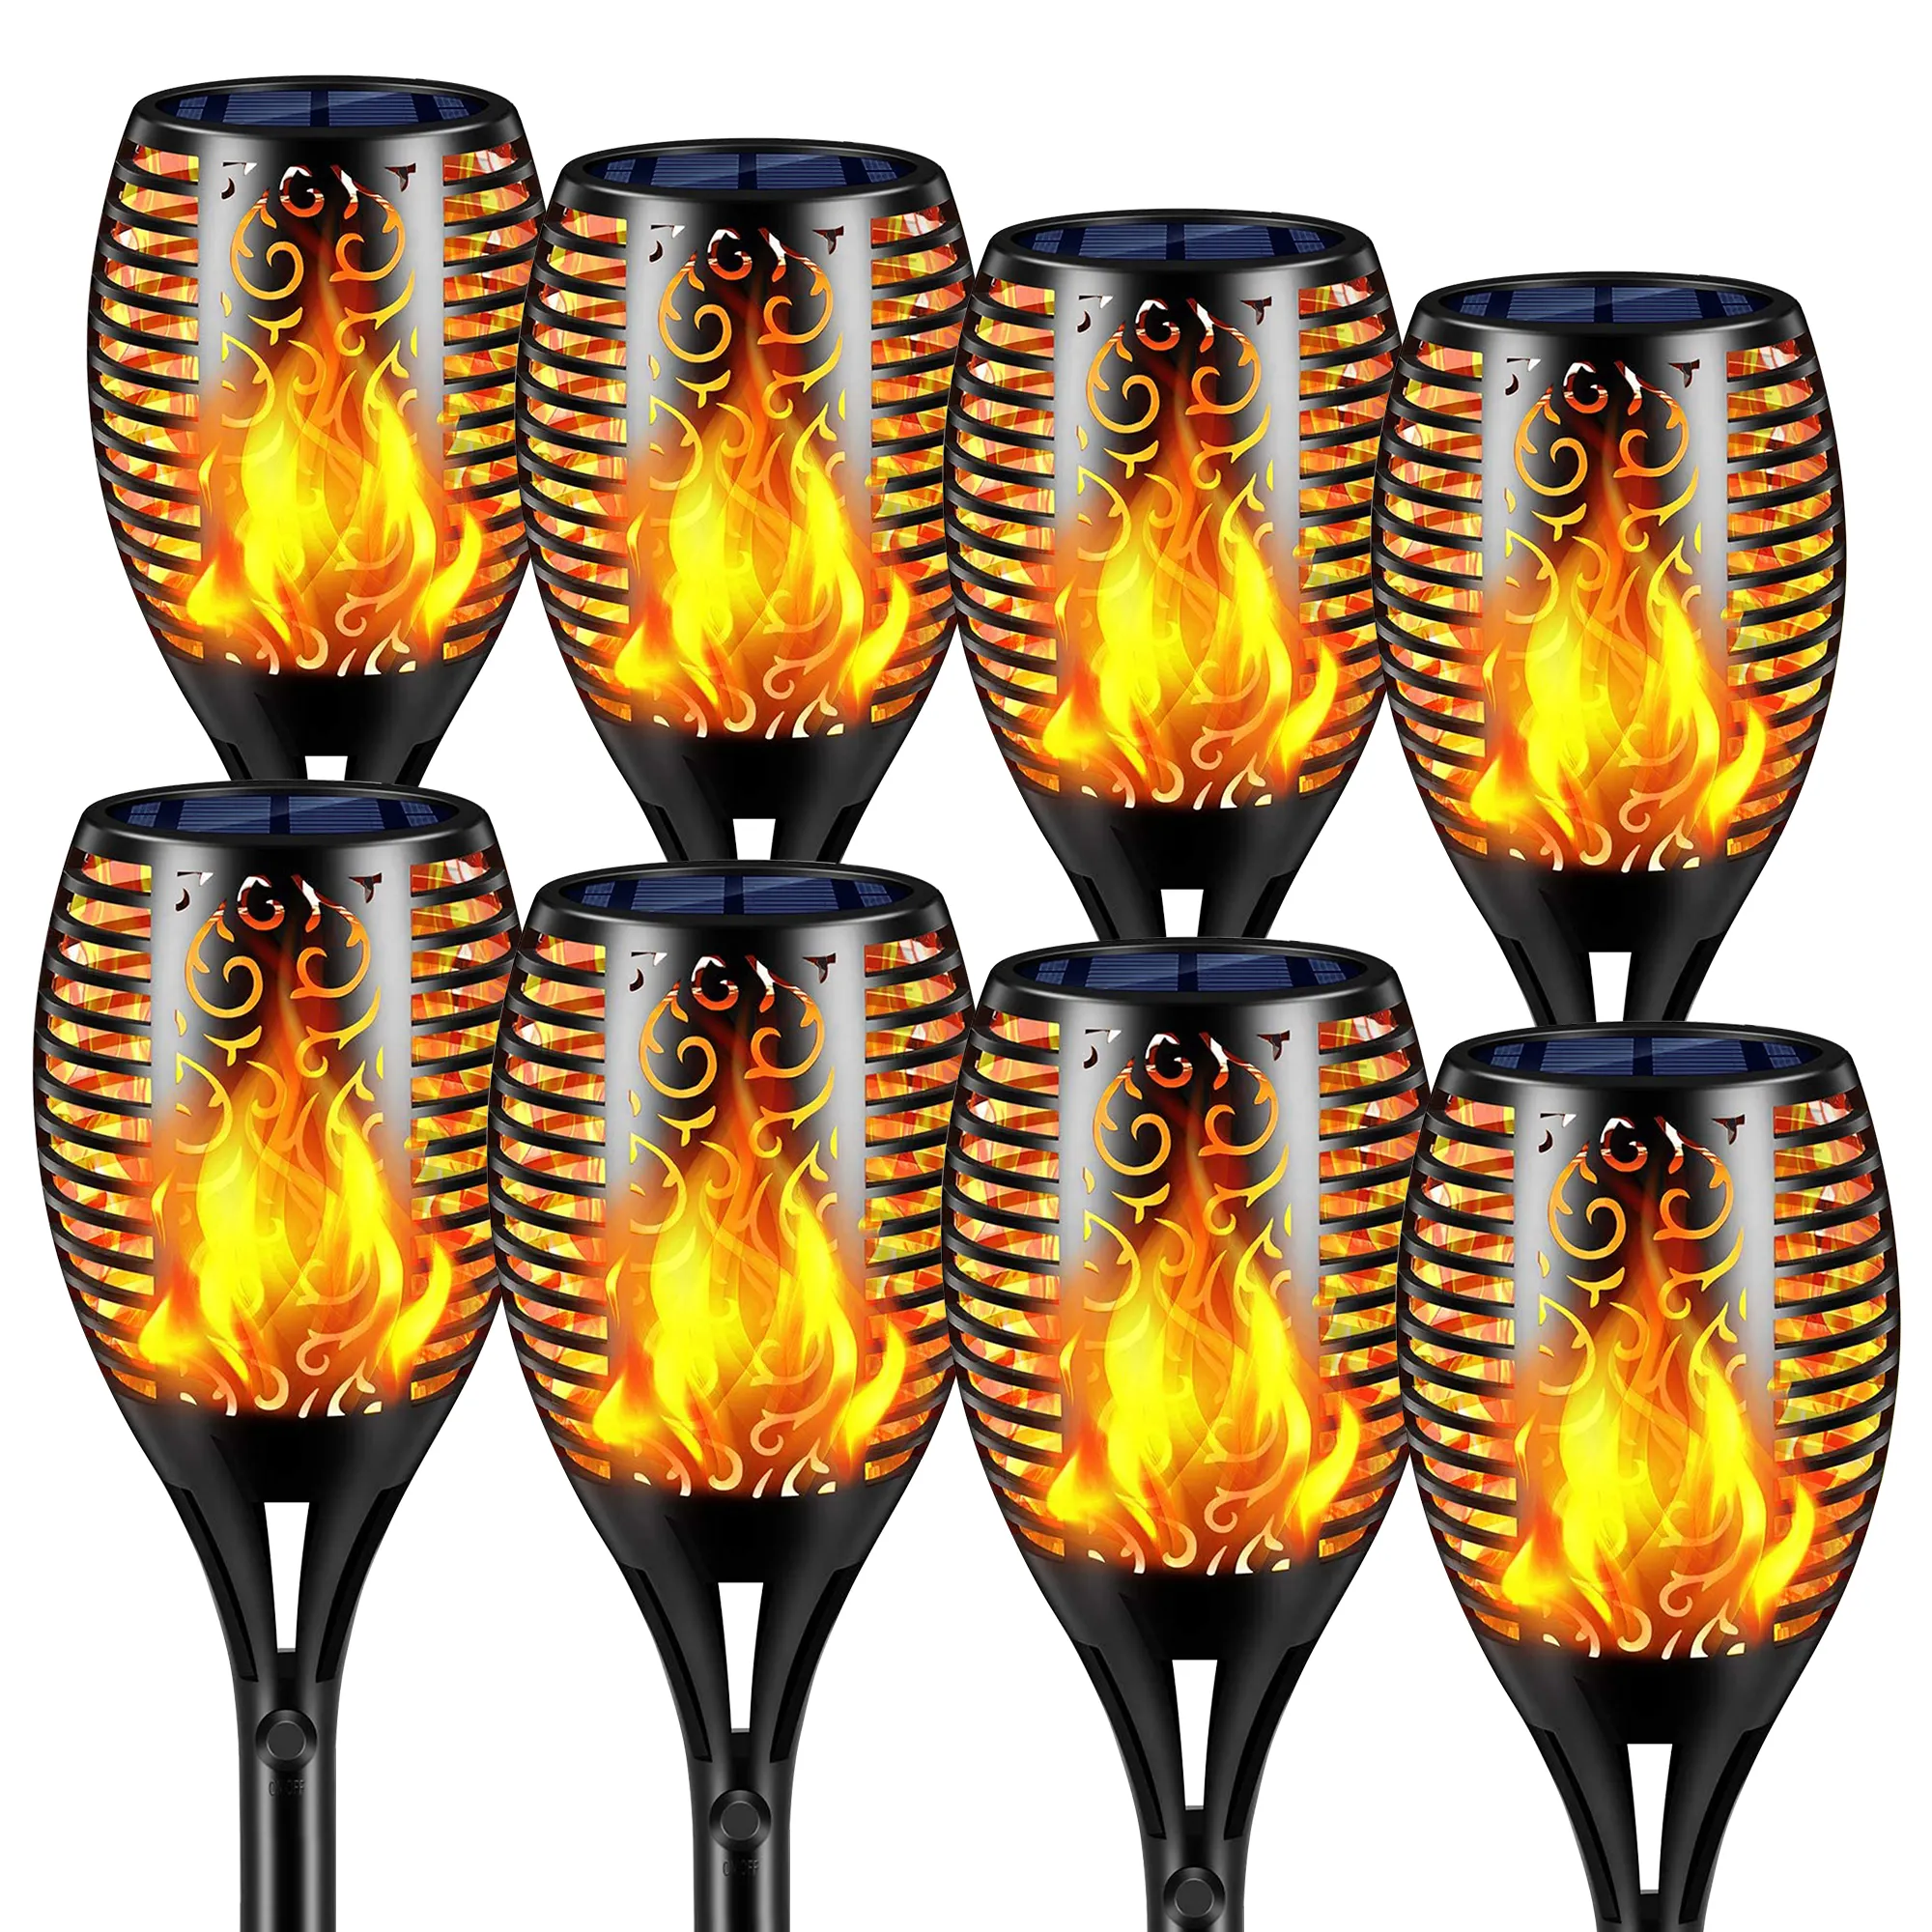 KAGAWA 12/33/72/96 LED Tiki Torches Landscape Decoration Pathway Lights Outdoor Solar Torch Light with Flickering Flame